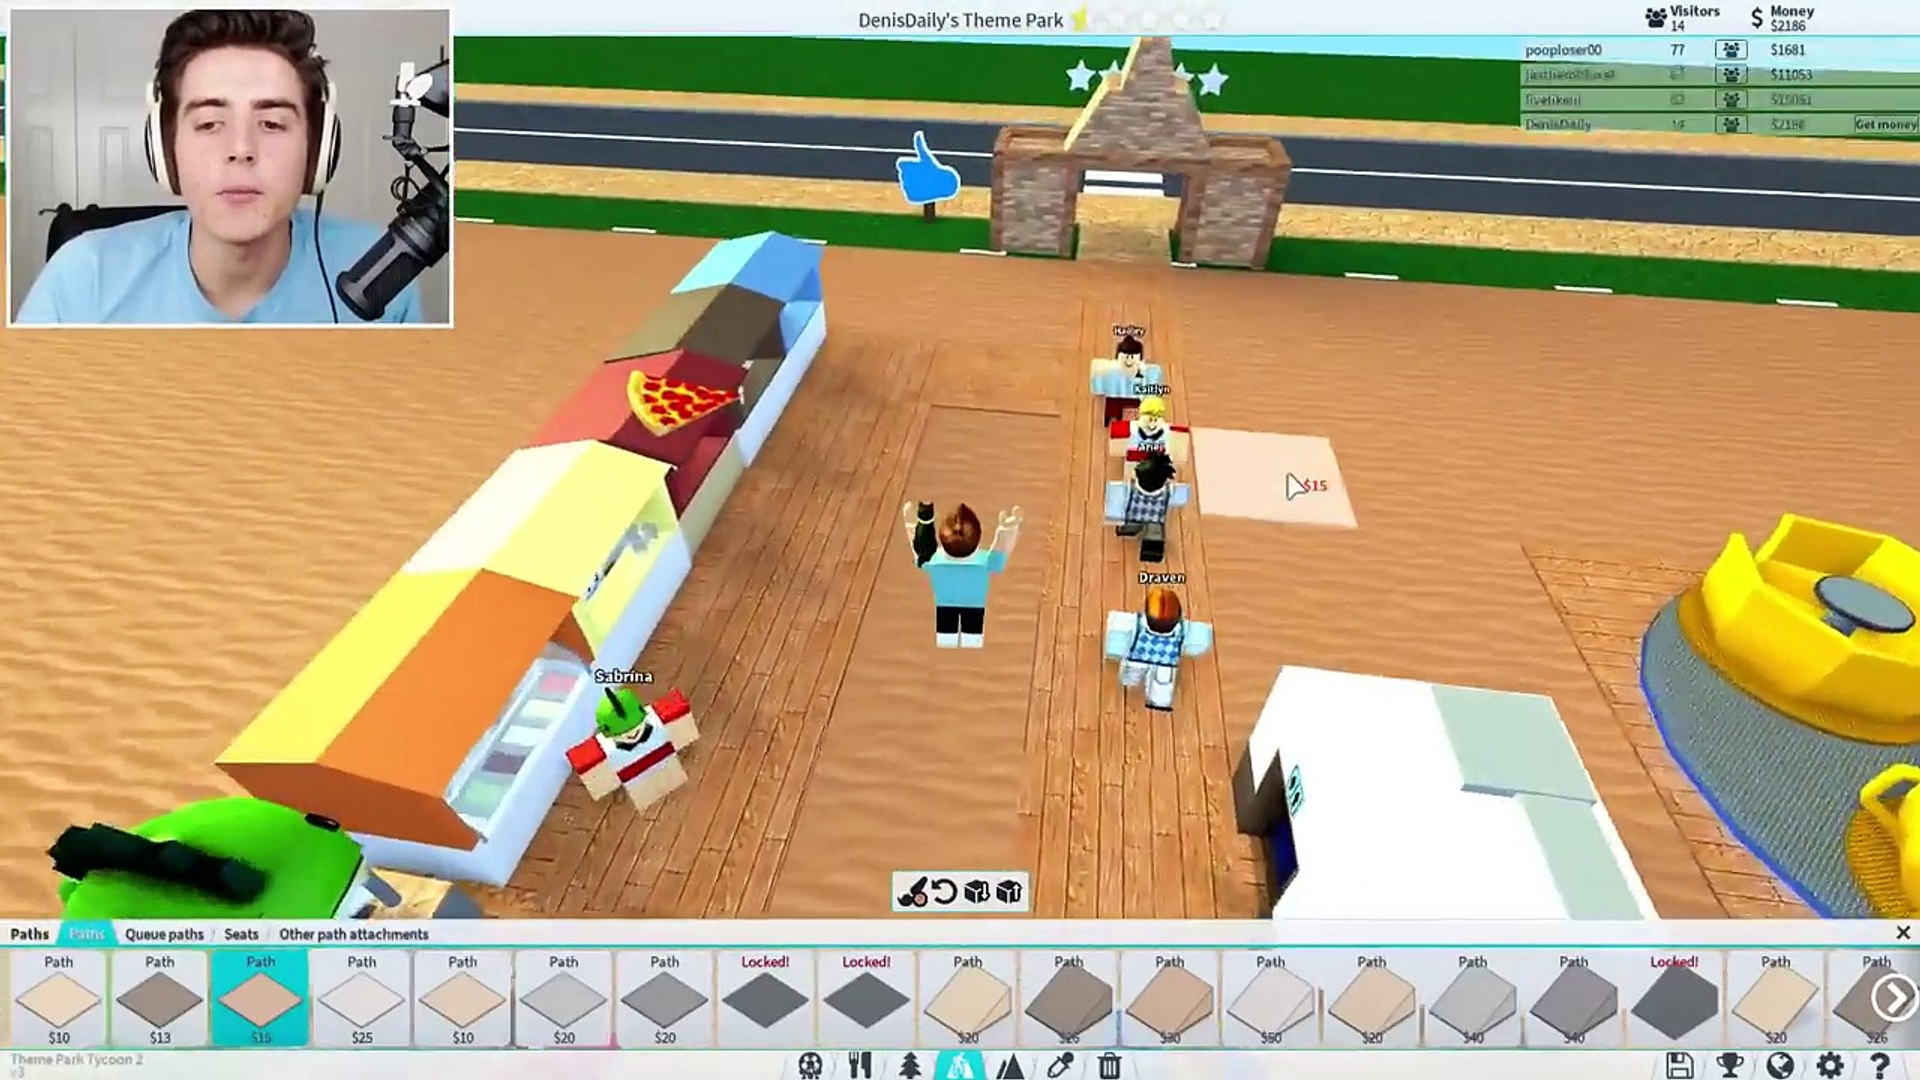 Roblox Games Theme Park Tycoon 2